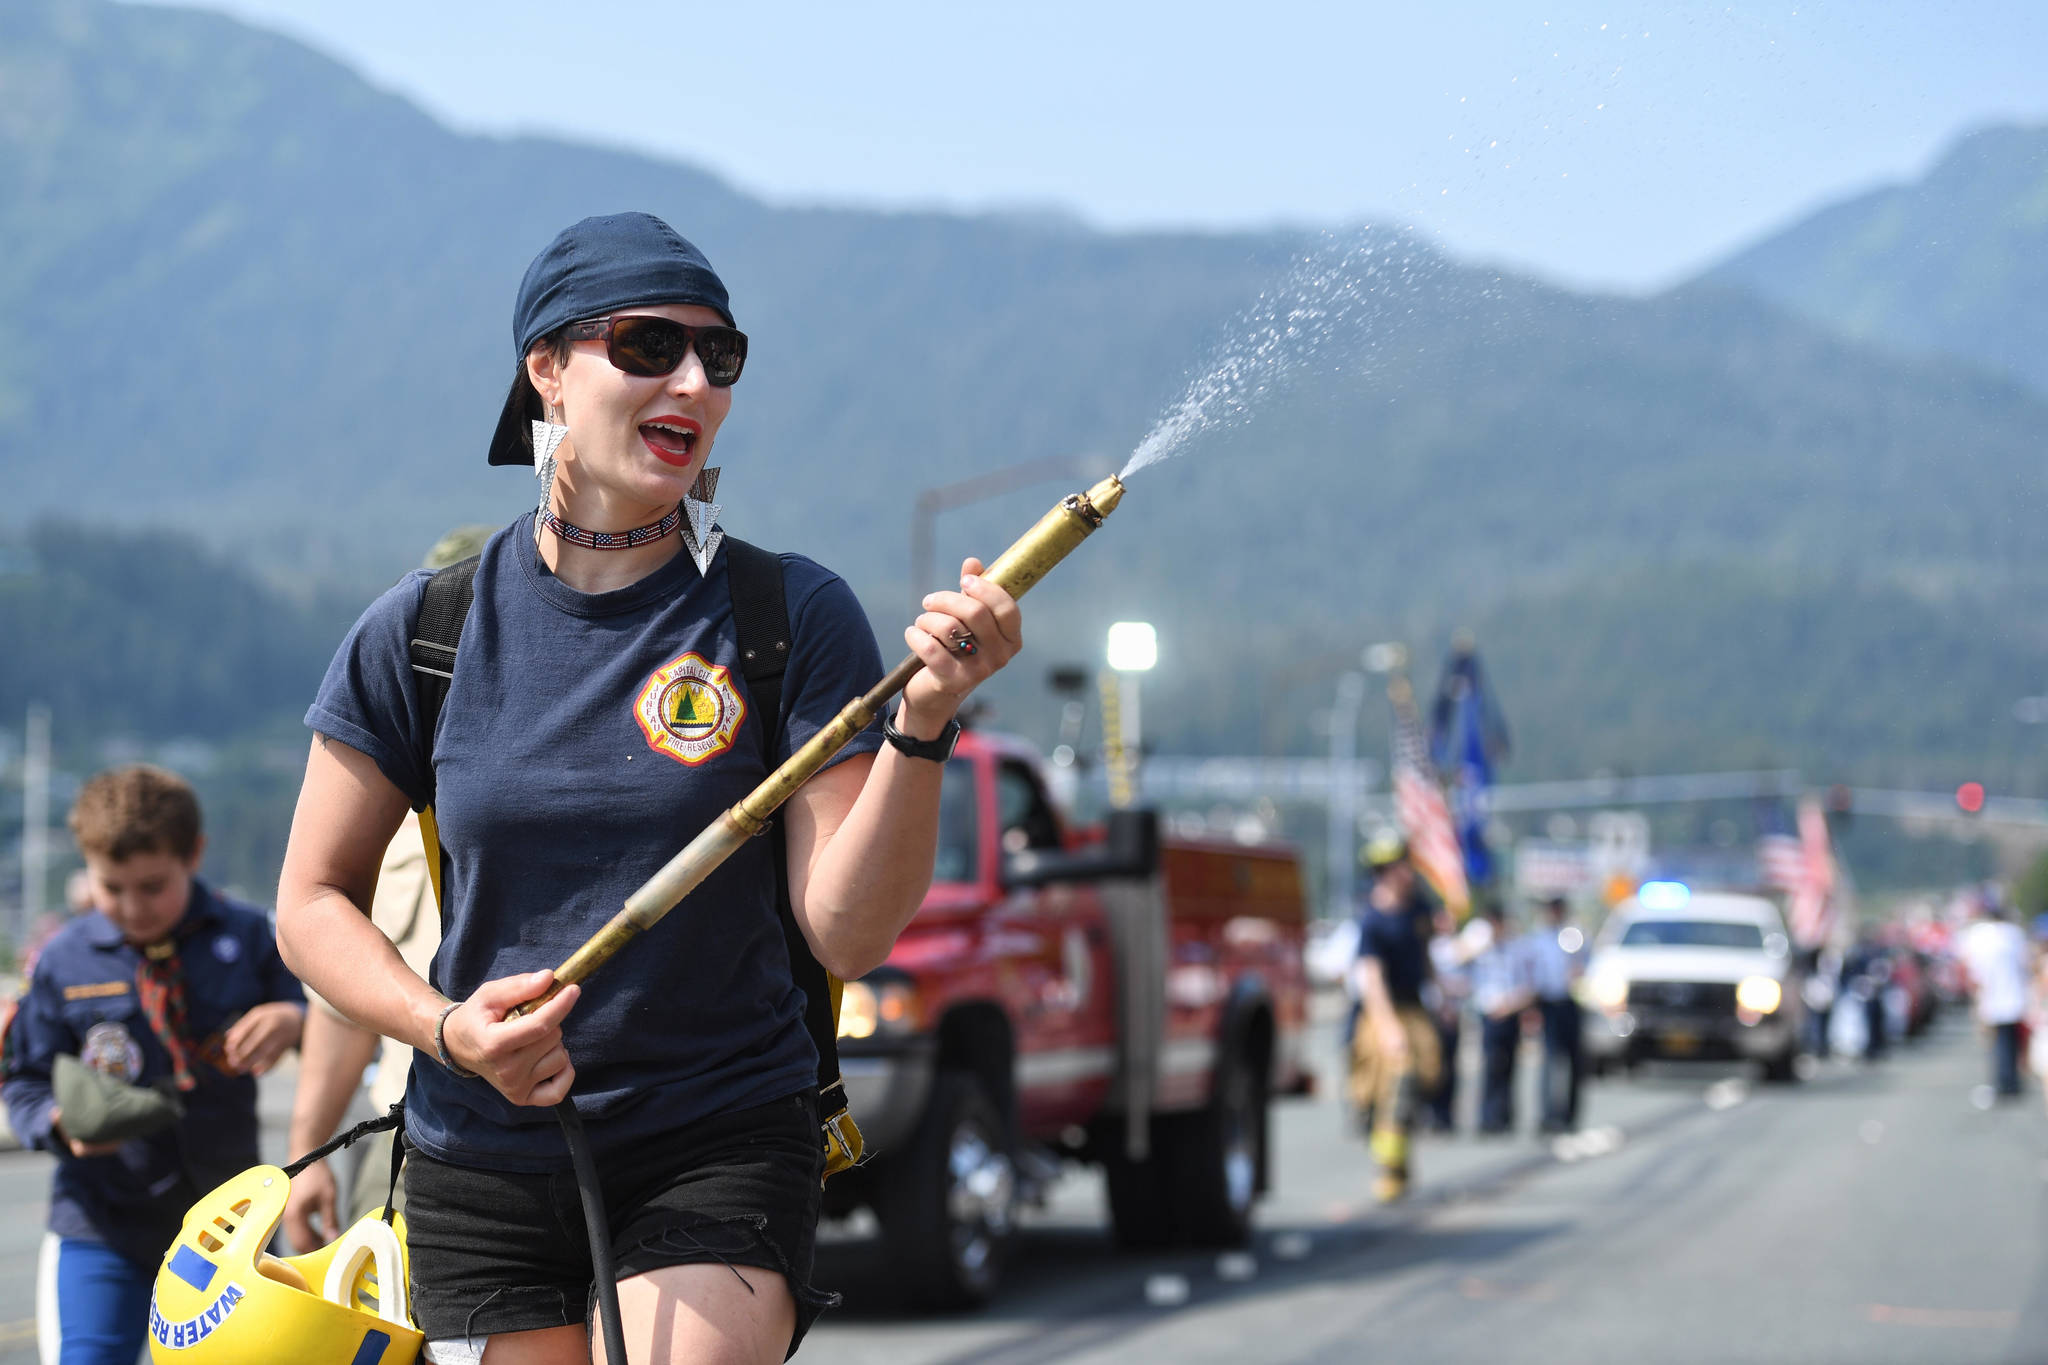 Meghan DeSloover of Capital City Fire/Rescue keeps people cool during the Fourth of July parade on Thursday, July 4, 2019. (Michael Penn | Juneau Empire)